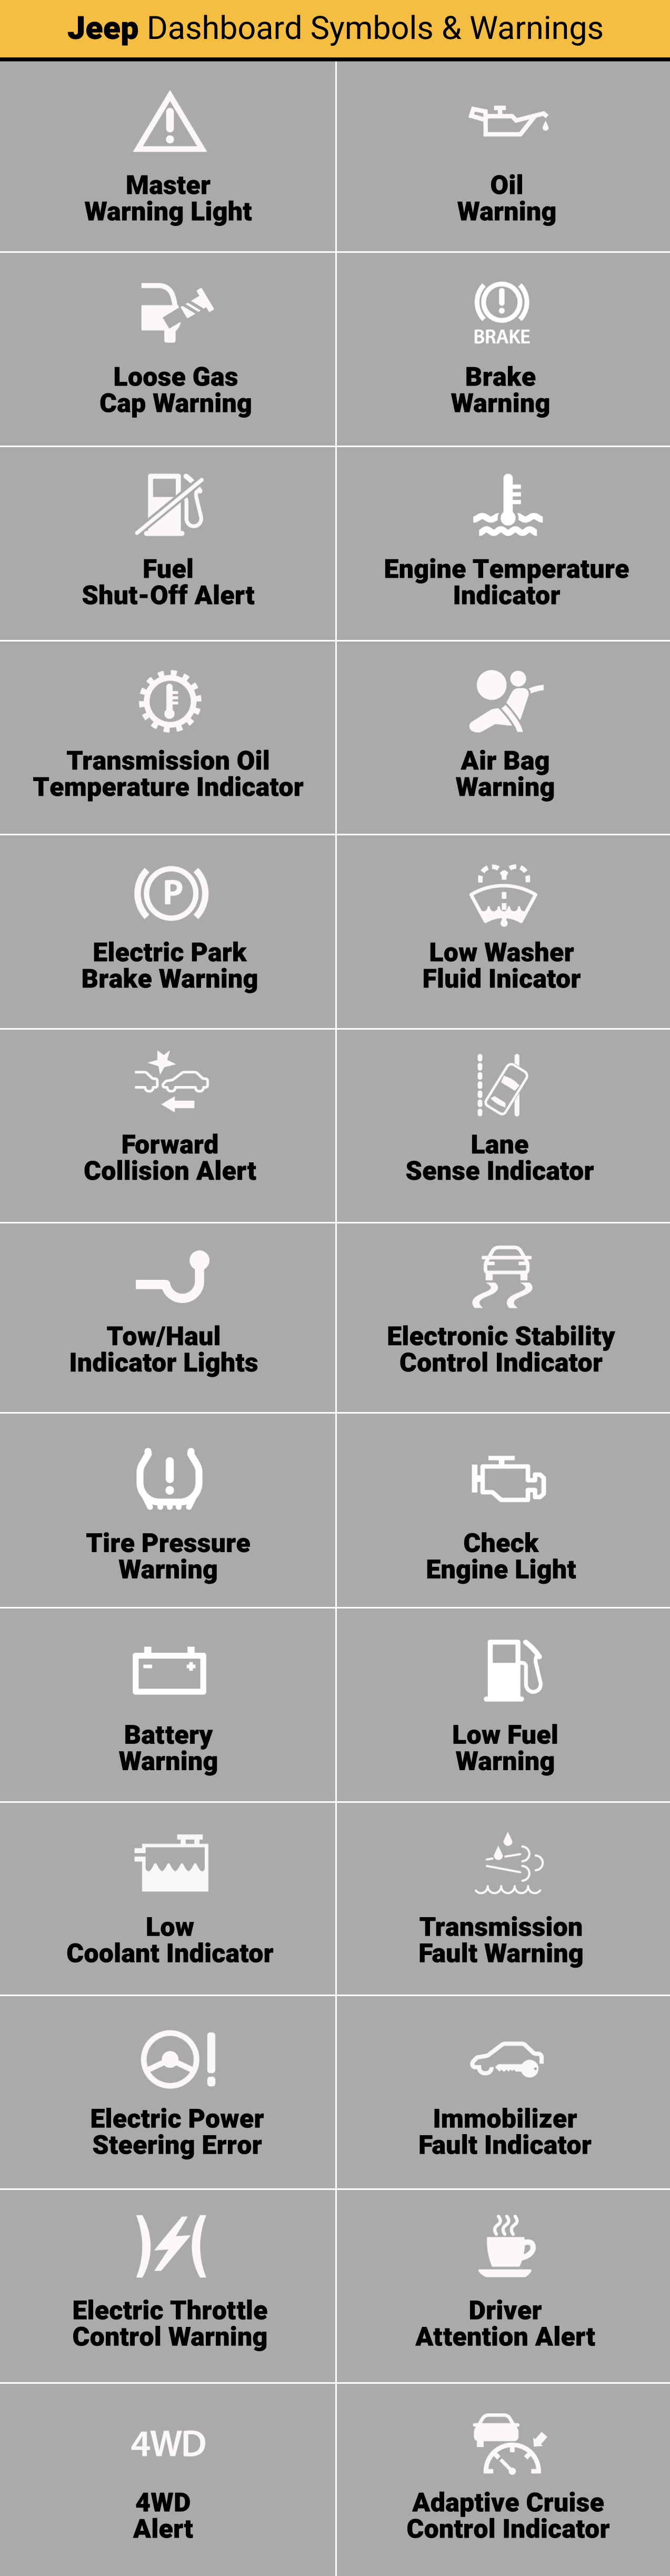 Jeep Dashboard Symbols Meaning Explained